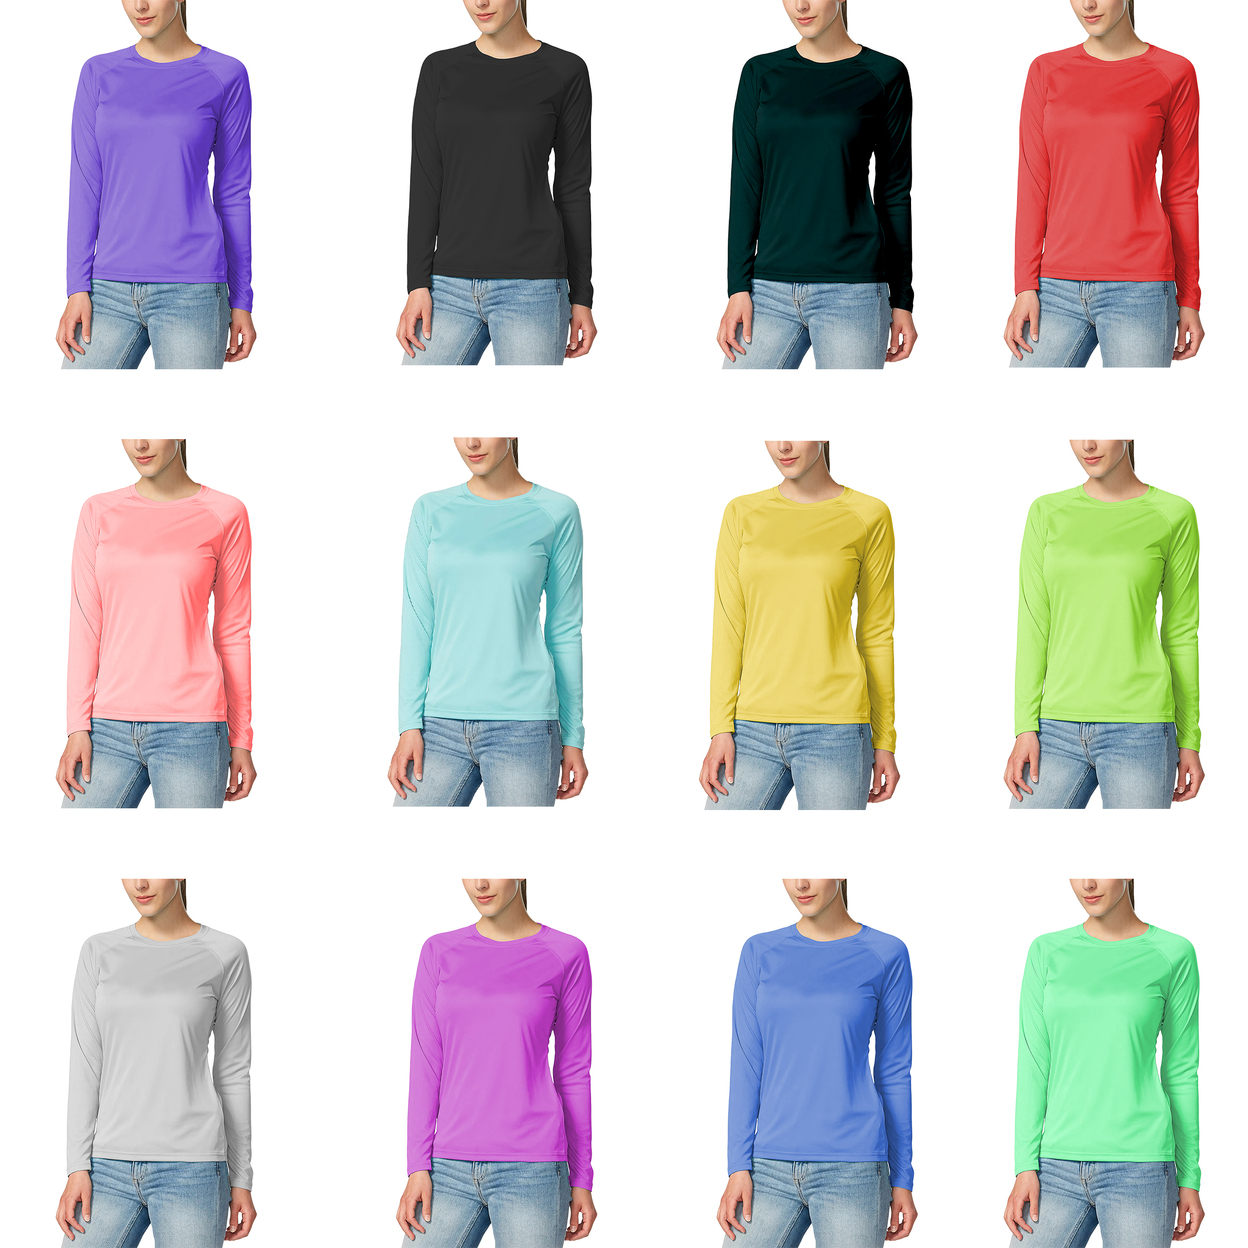 3-Pack: Women's Dri-Fit Moisture-Wicking Breathable Long Sleeve T-Shirt - X-large